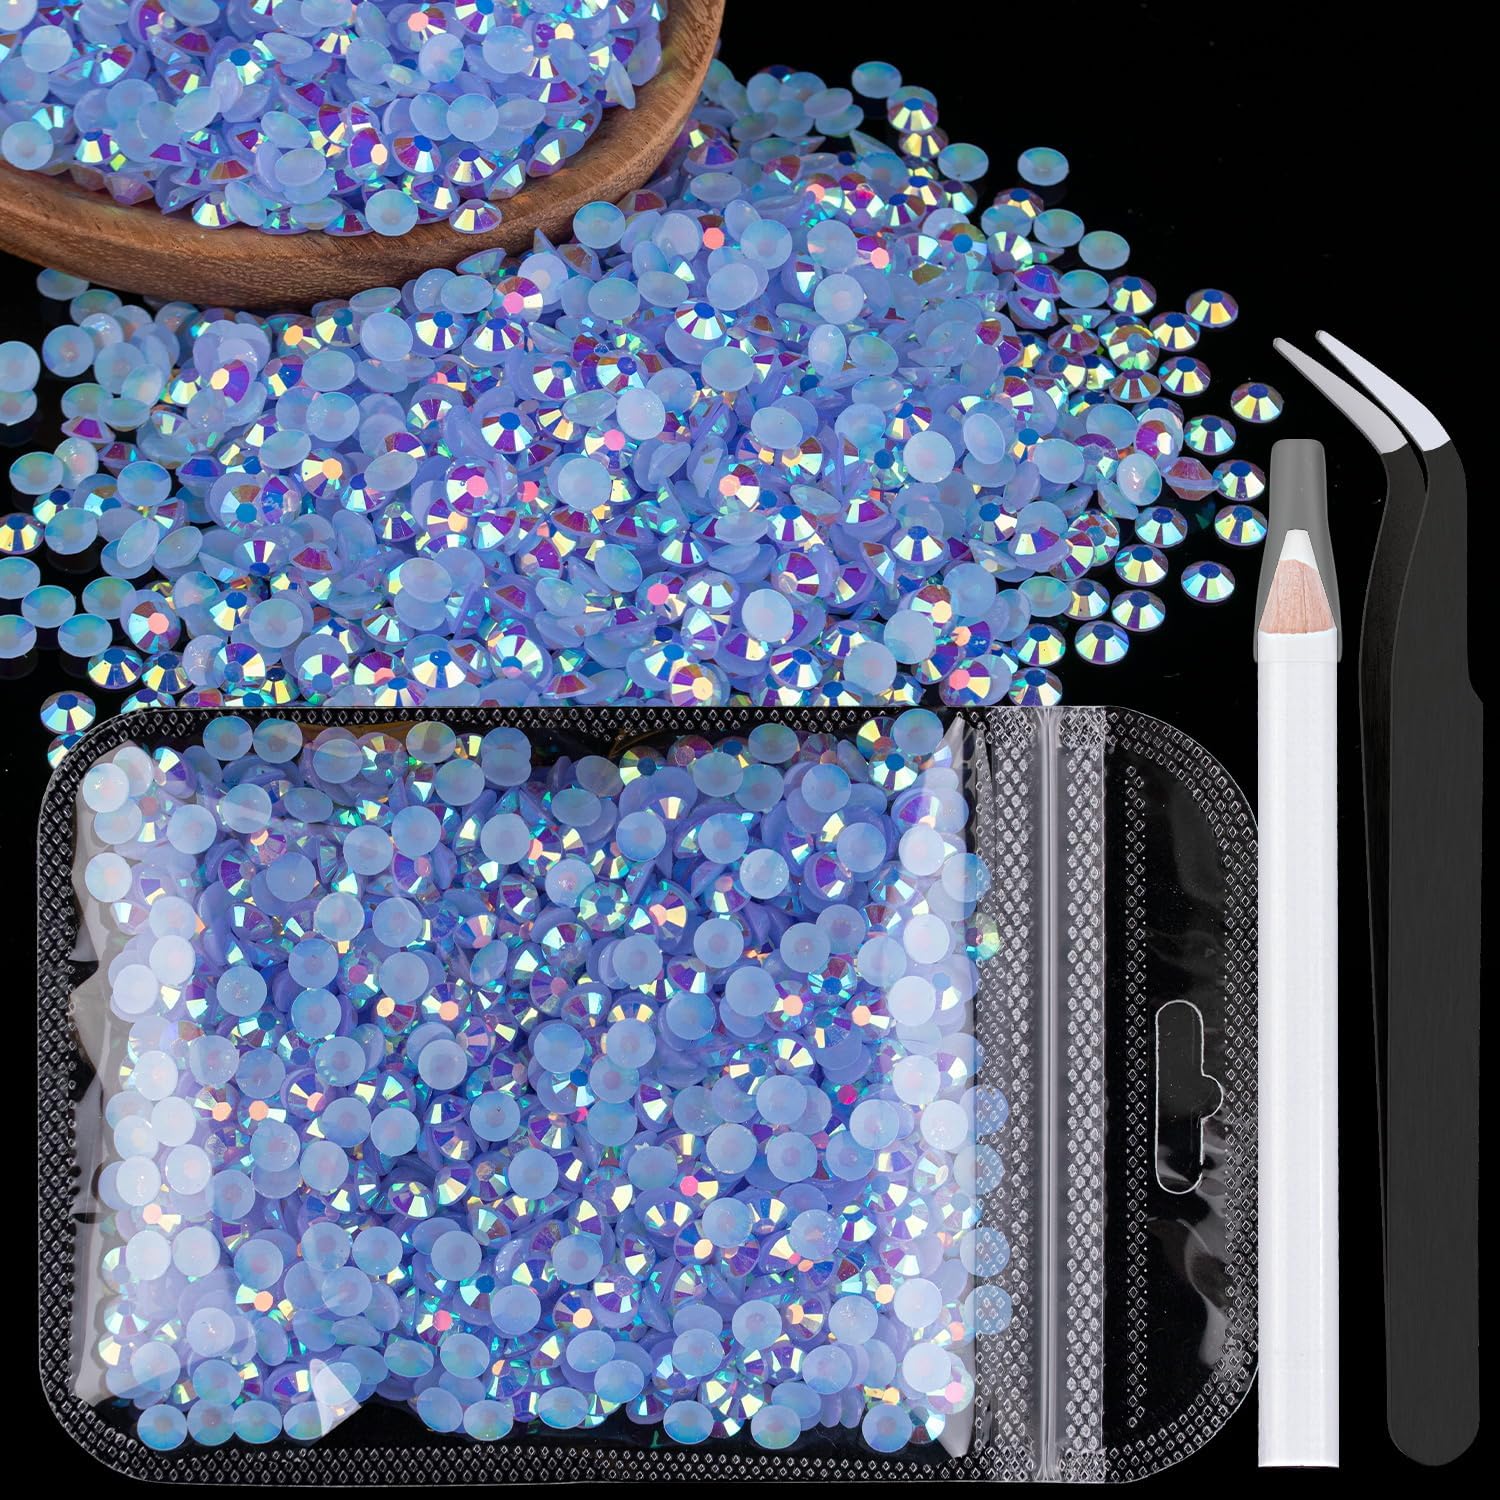 28800pcs Flatback Rhinestones Kit for Tumblers - 4 Sizes Jelly Pueple Dark  Blue White AB Crystals Rhinestones for Craft Nails Art Bling Cup, Mulit  Color Gems for Rhinestone Makeup Clothes Jewelry Blue 05